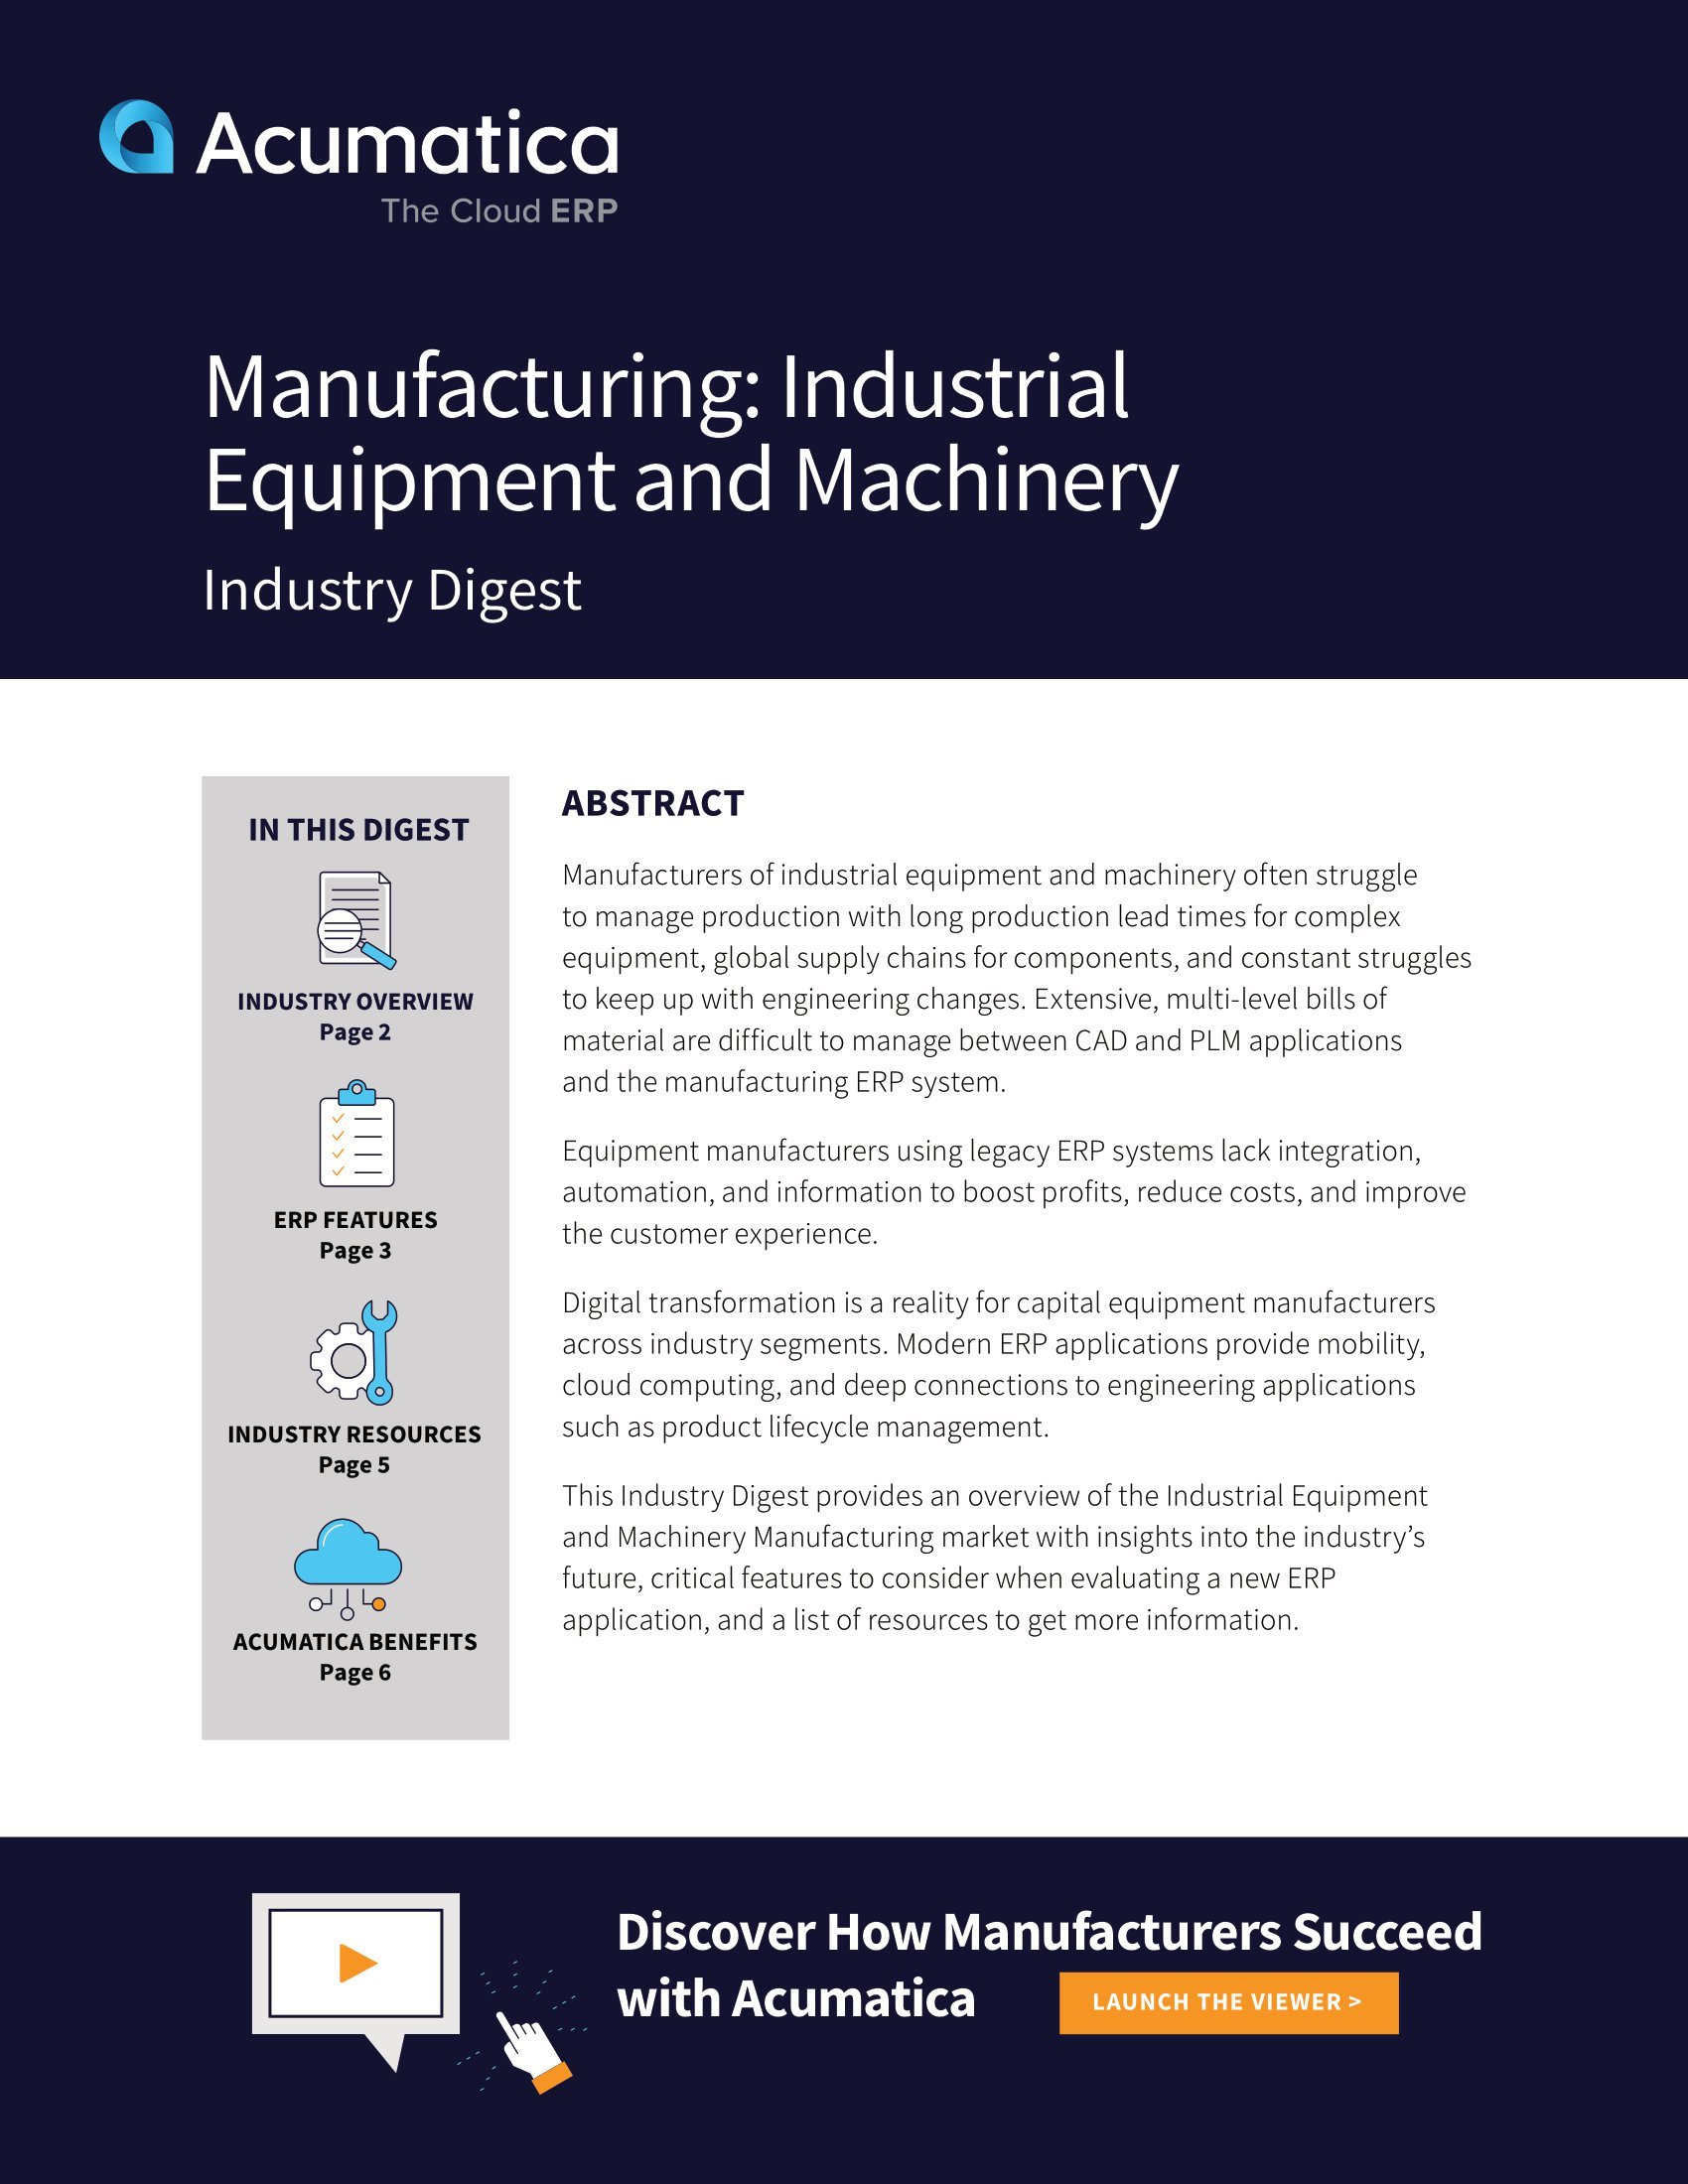 Finding an Industrial Equipment and Machinery Manufacturing ERP